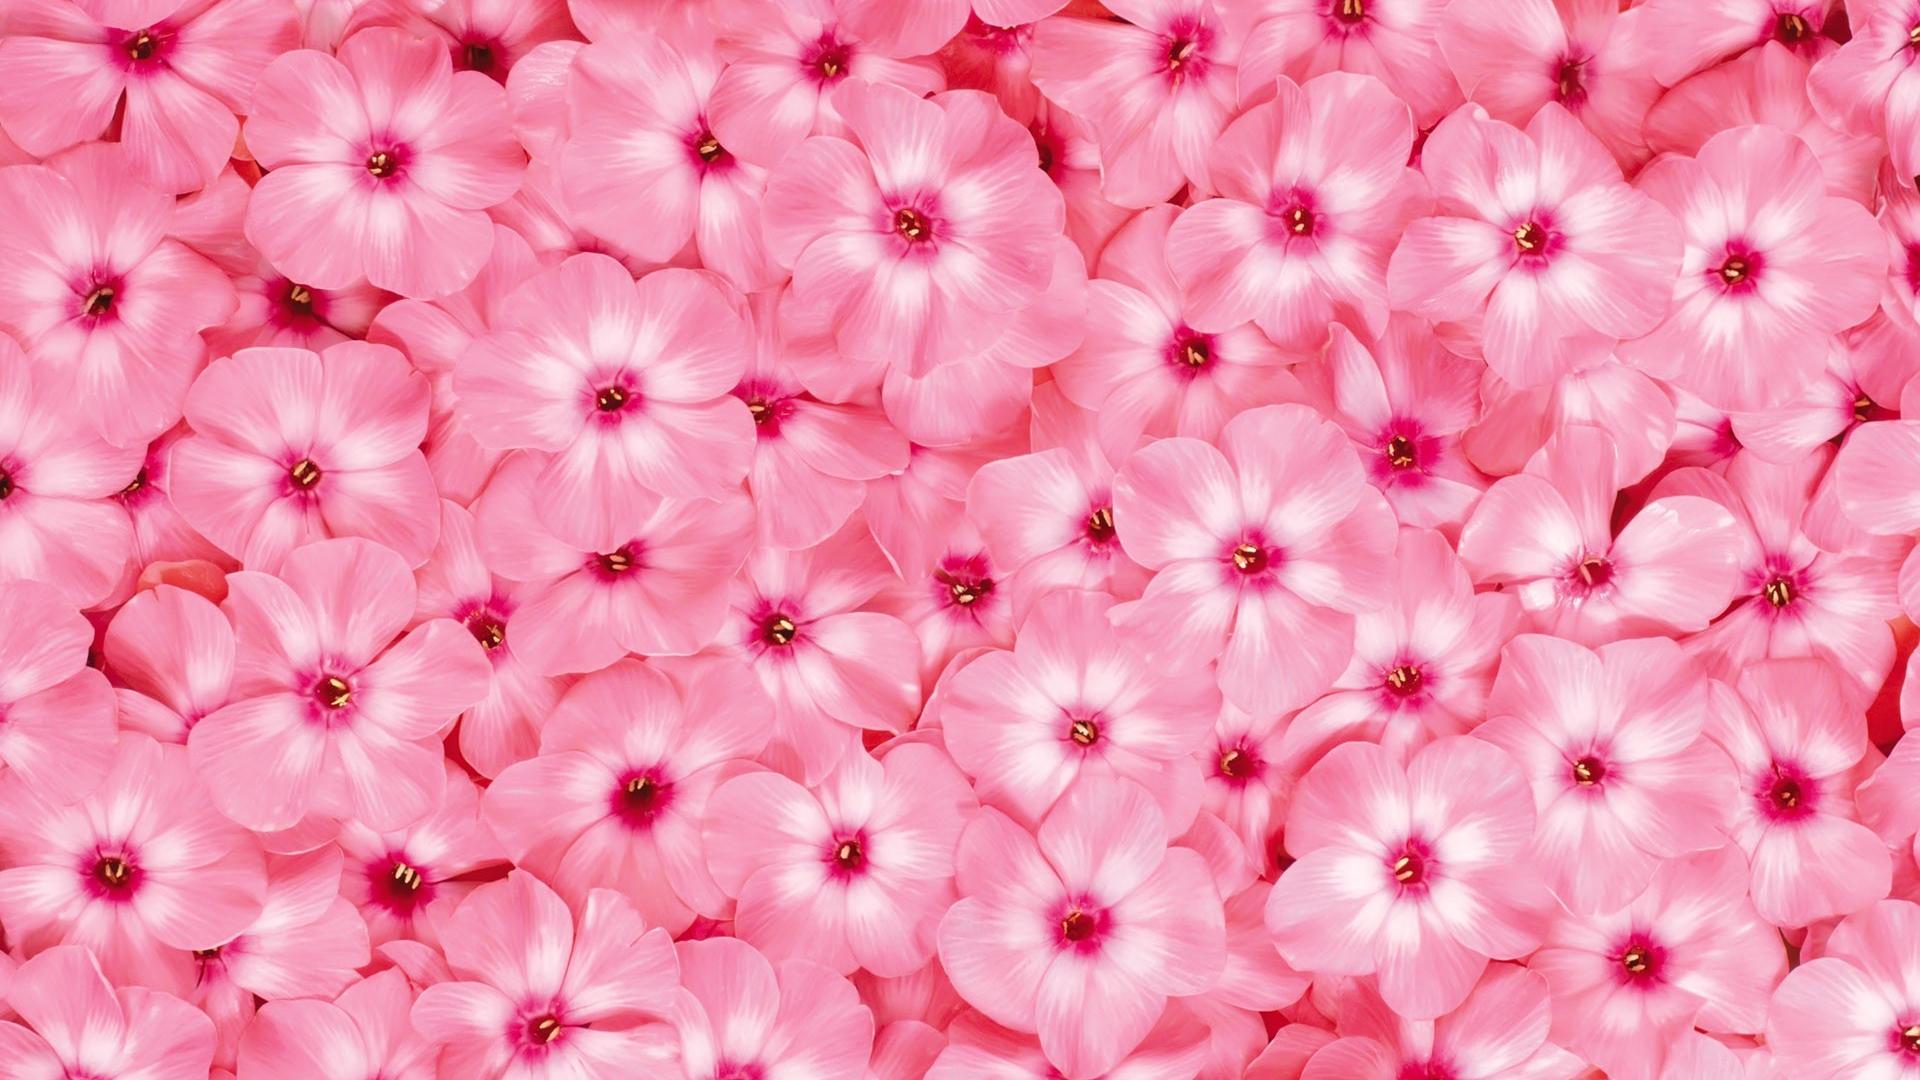 Close-up flowers pink background wallpaper | (2993)